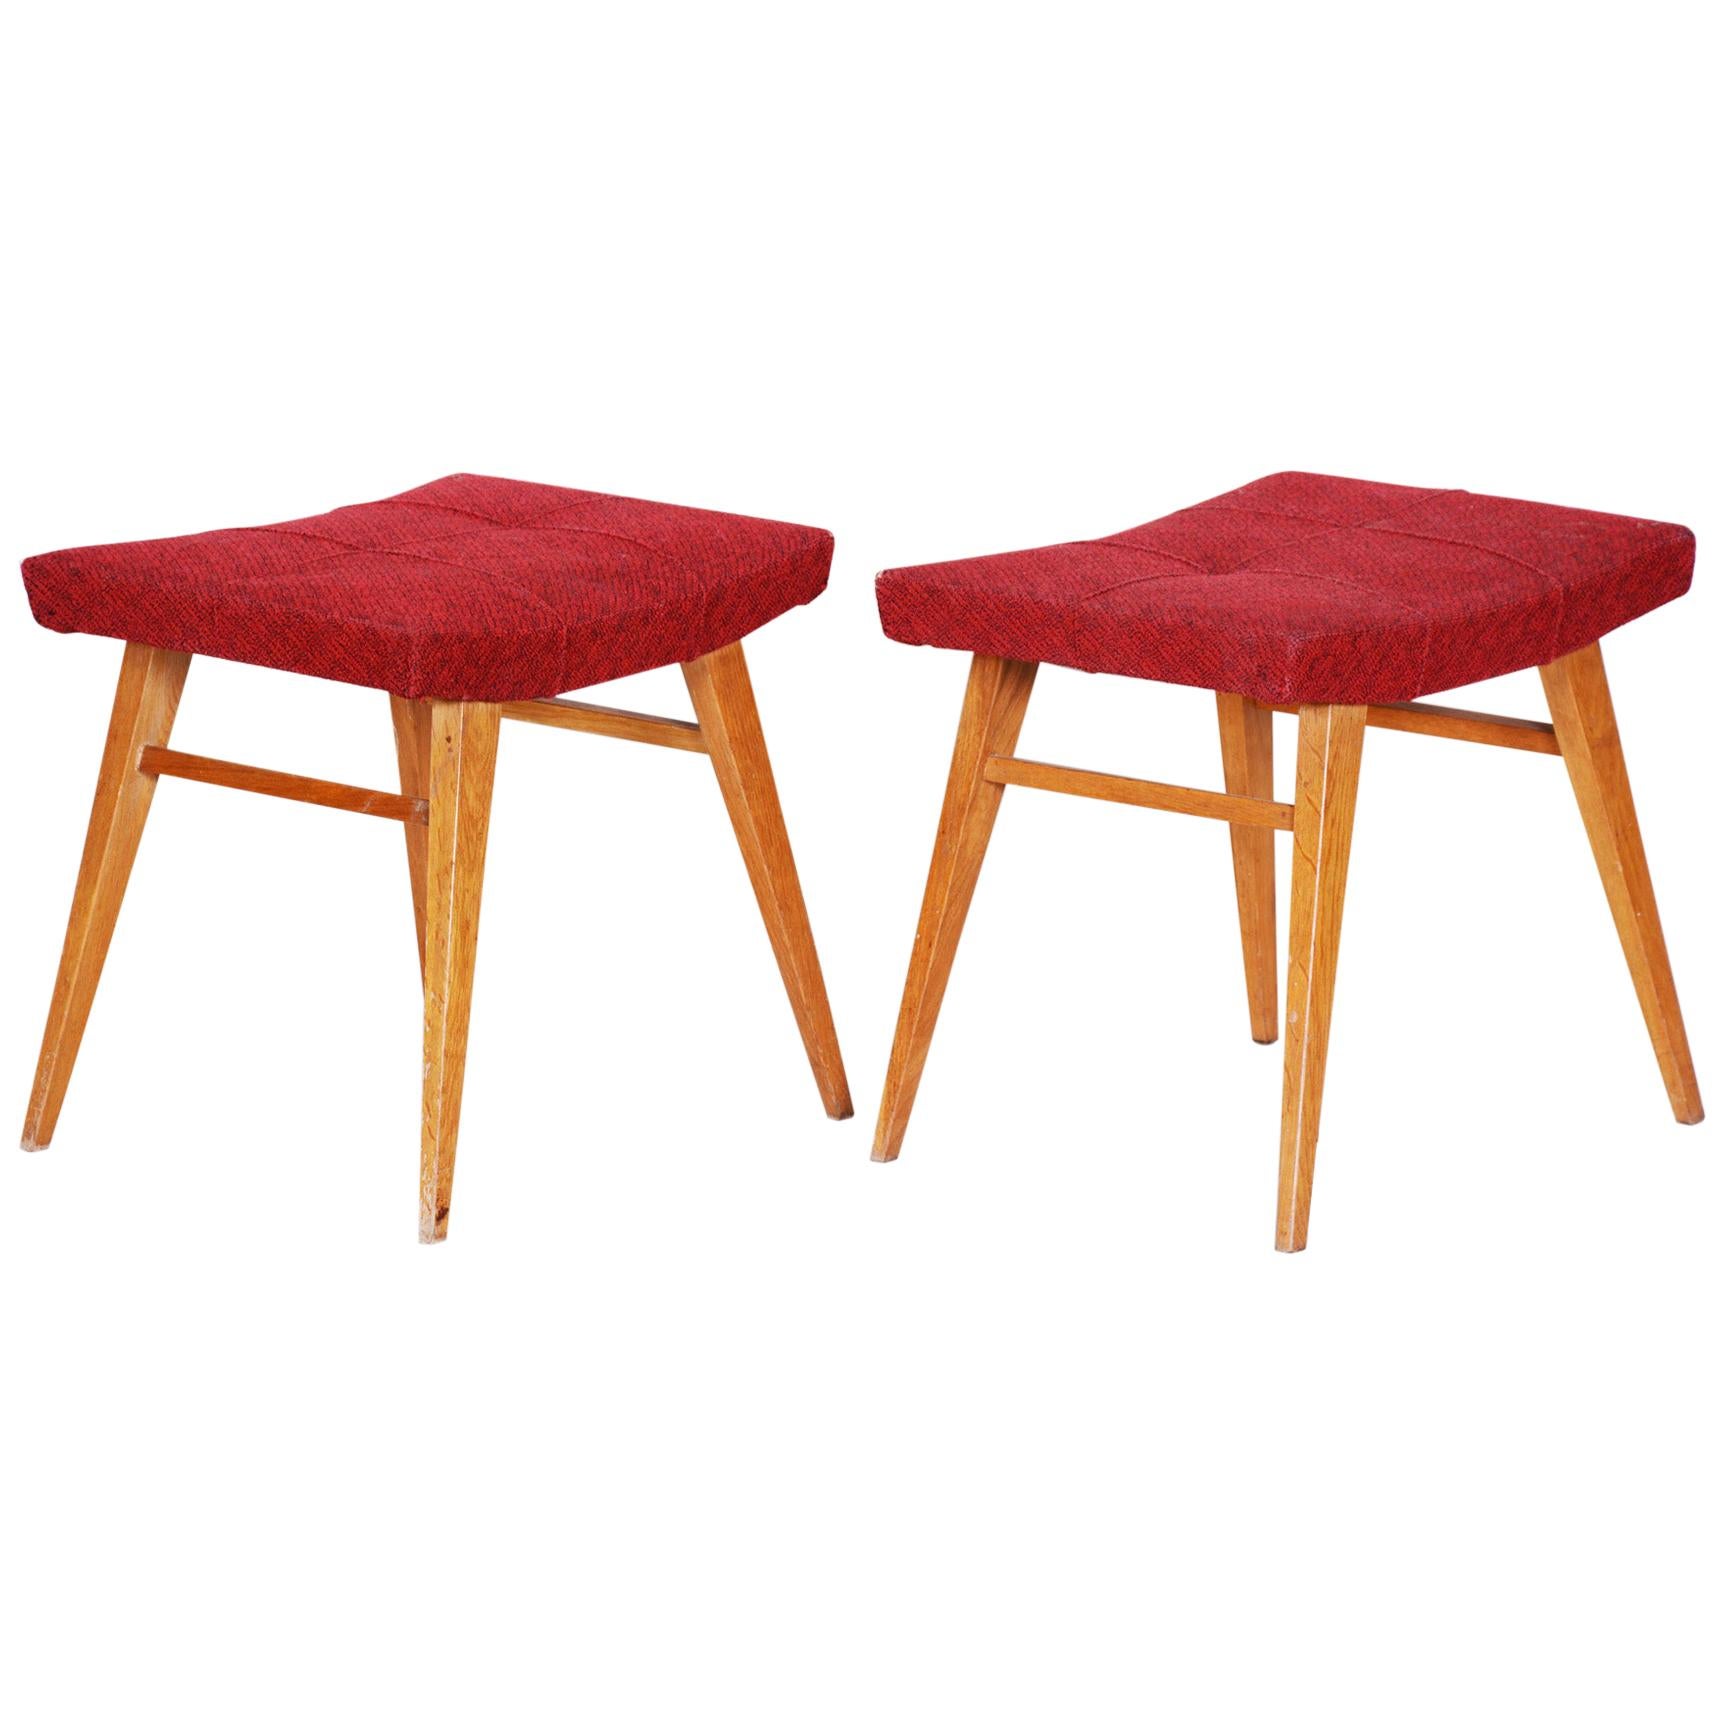 Pair of Midcentury Red Beech Stools, 1960s, Original Preserved Condition For Sale